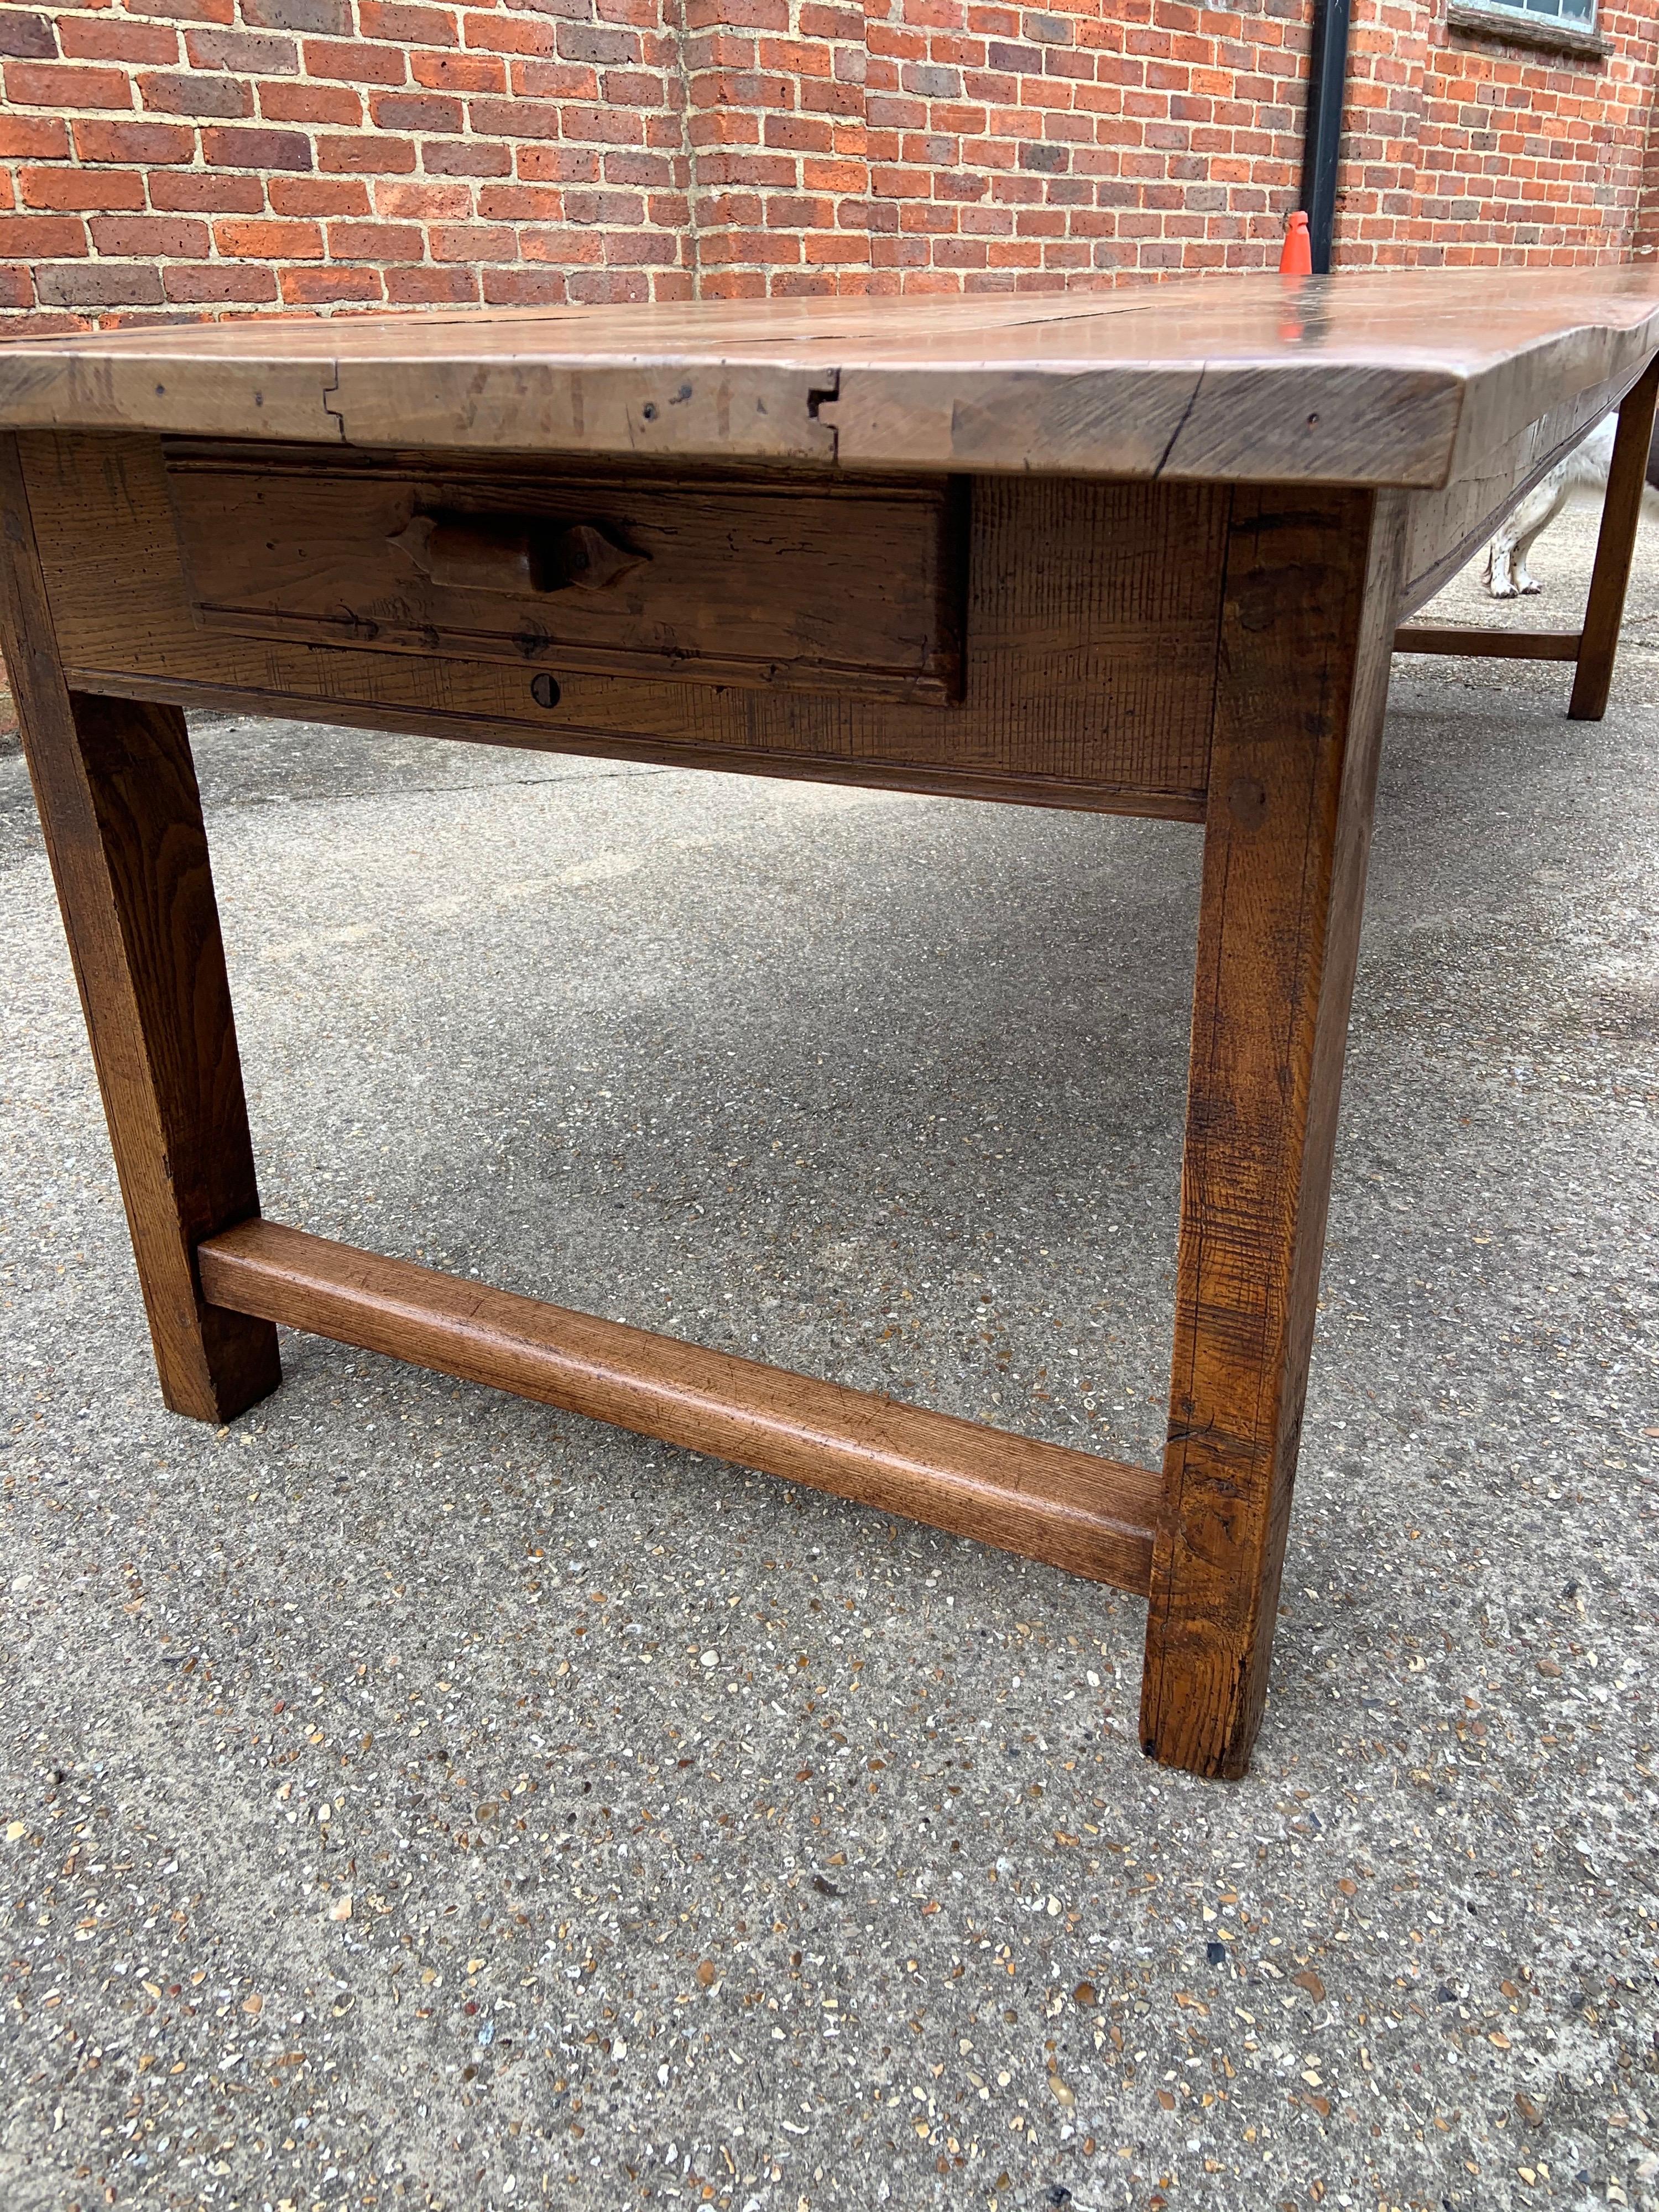 Hand-Crafted Large Rustic Pale Beech Farmhouse Table